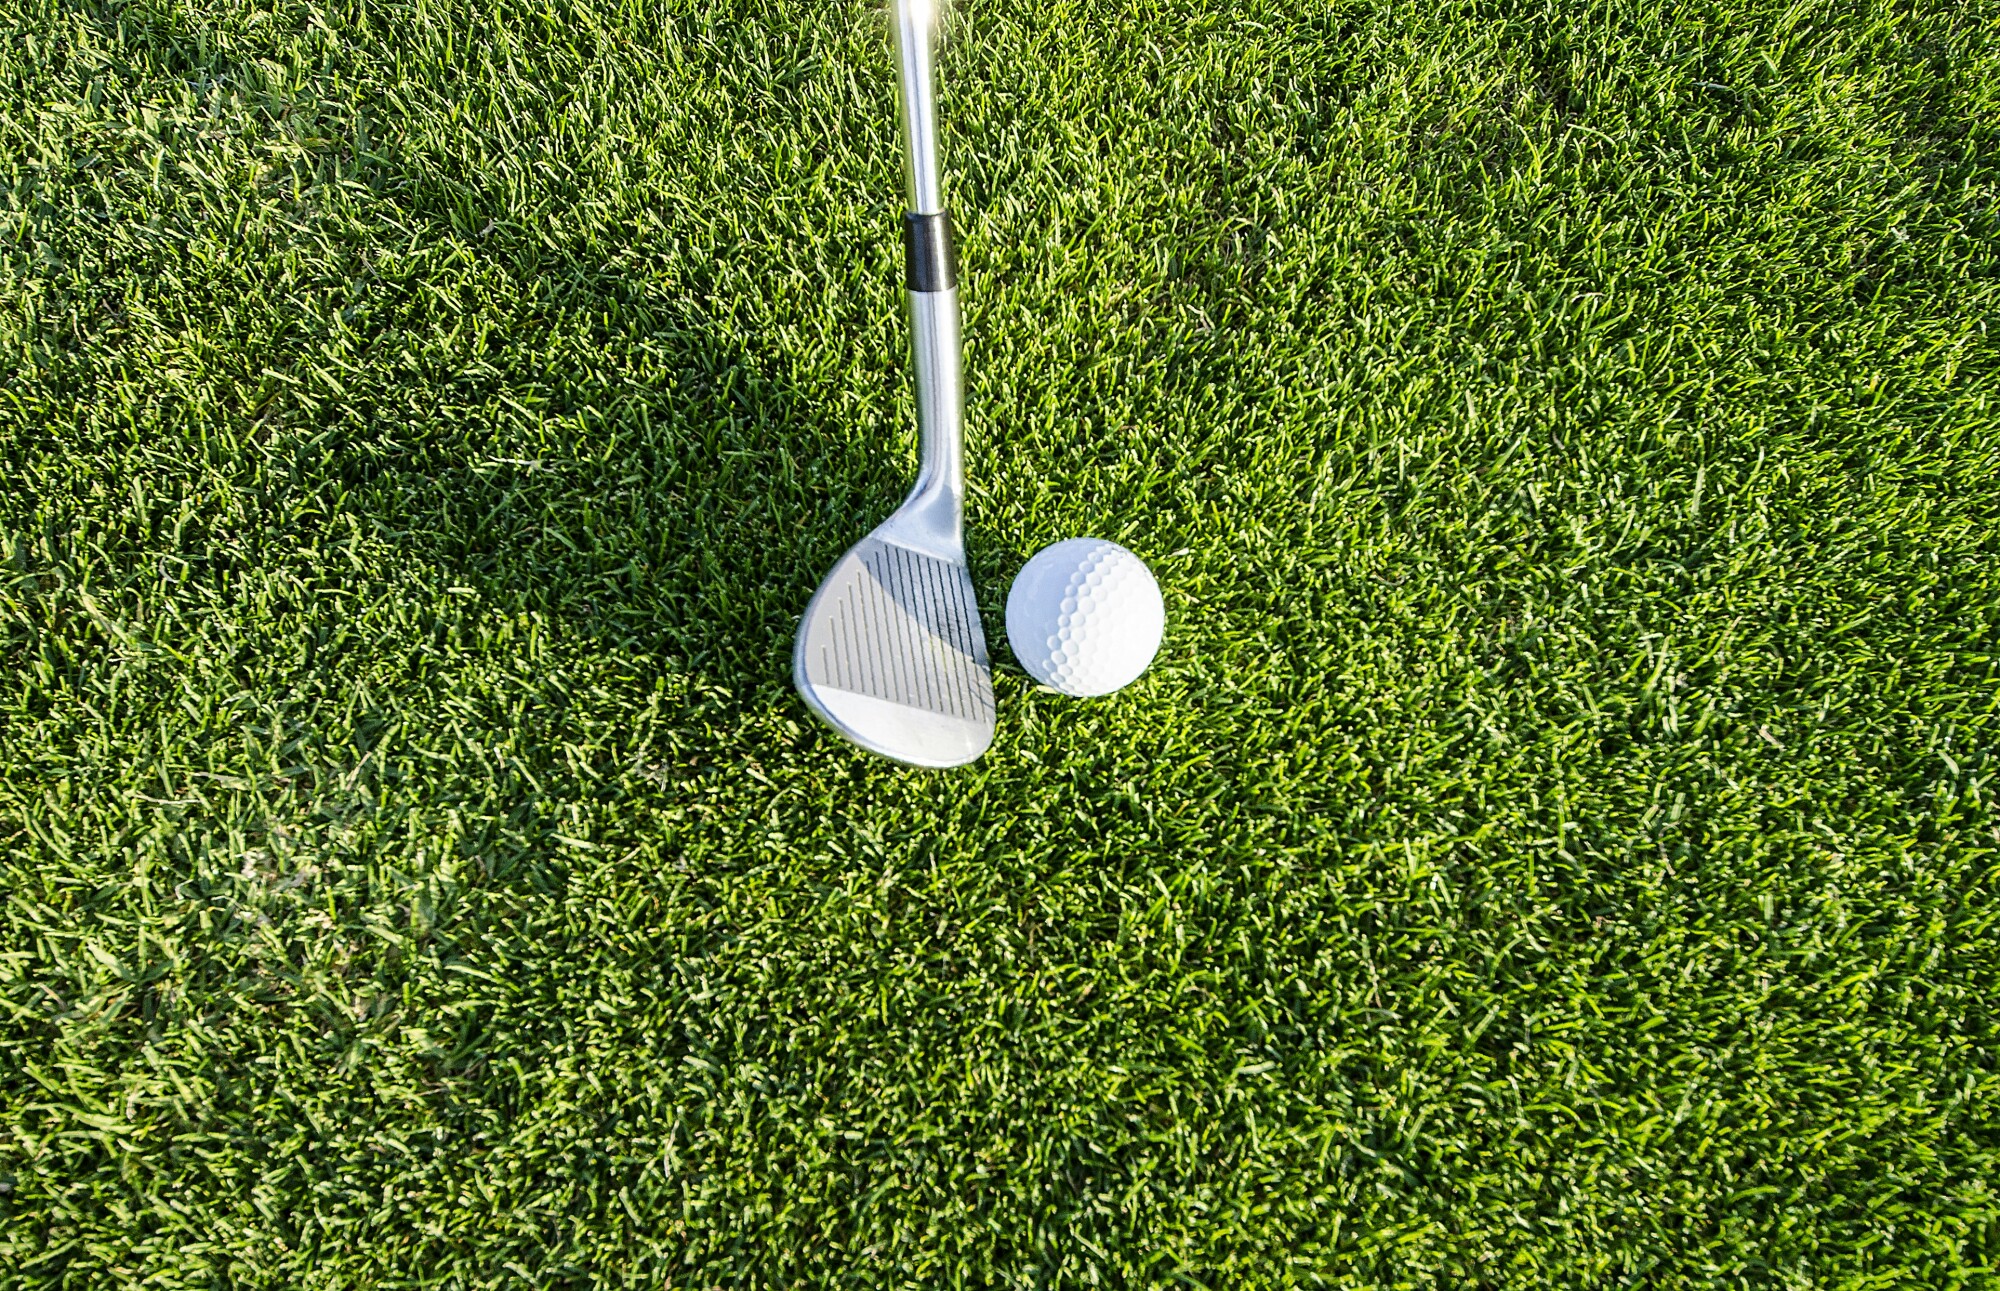  Improving Chipping in Golf